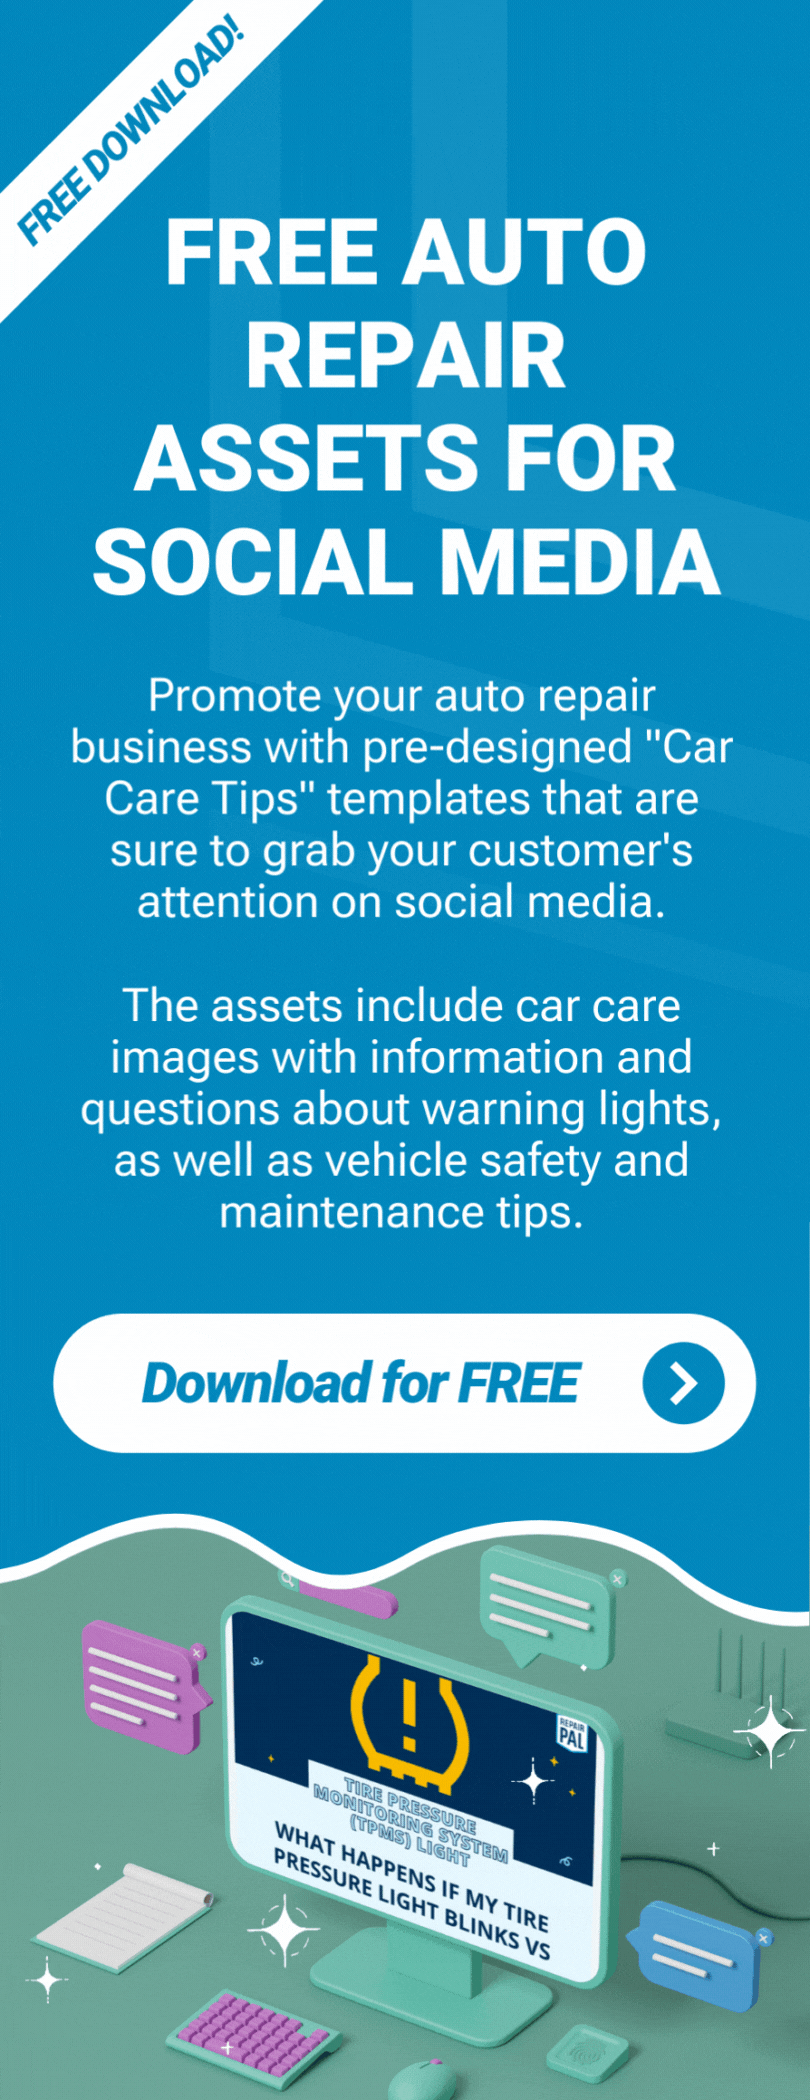 FREE Auto Repair Assets for Social Media